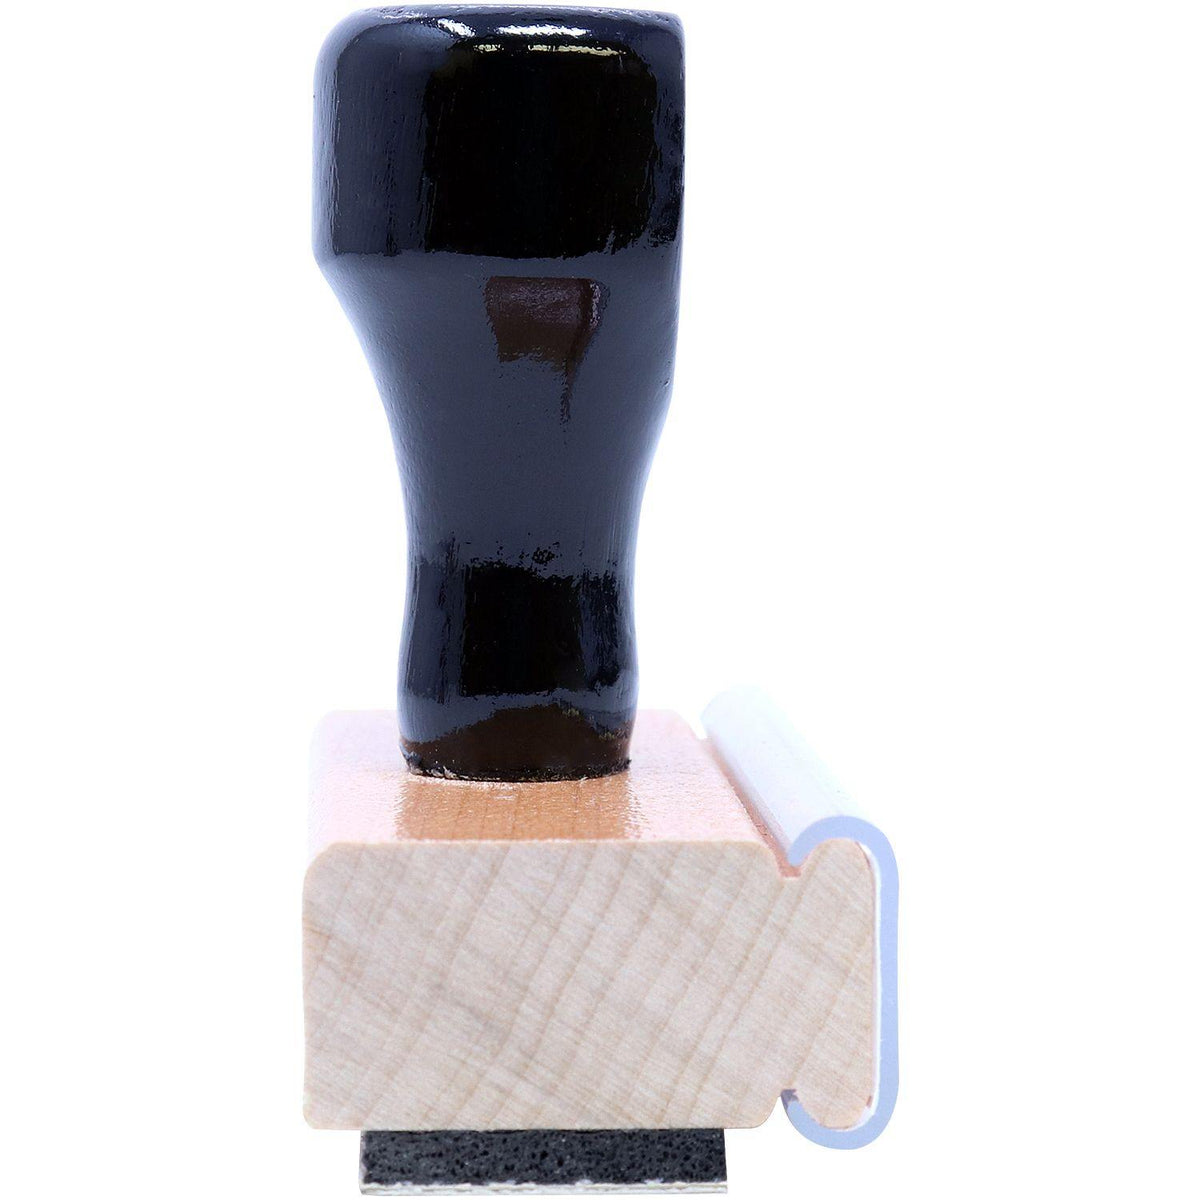 Narrow Confidential Rubber Stamp - Engineer Seal Stamps - Brand_Acorn, Impression Size_Small, Stamp Type_Regular Stamp, Type of Use_General, Type of Use_Office, Type of Use_Professional